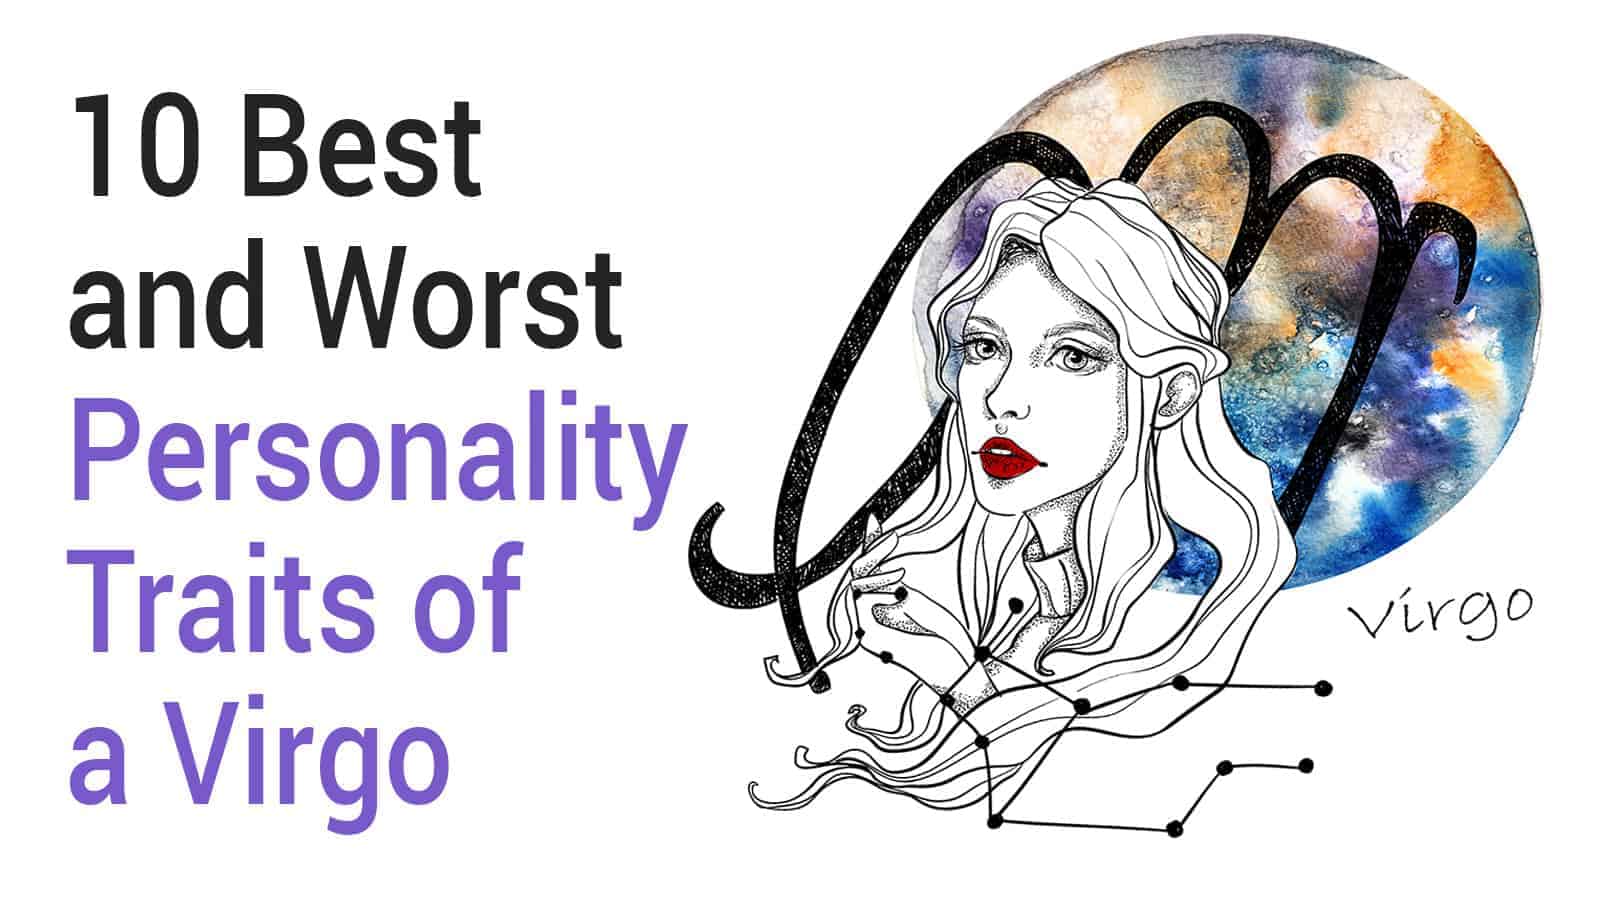 10 Best & Worst Personality Traits of a Virgo